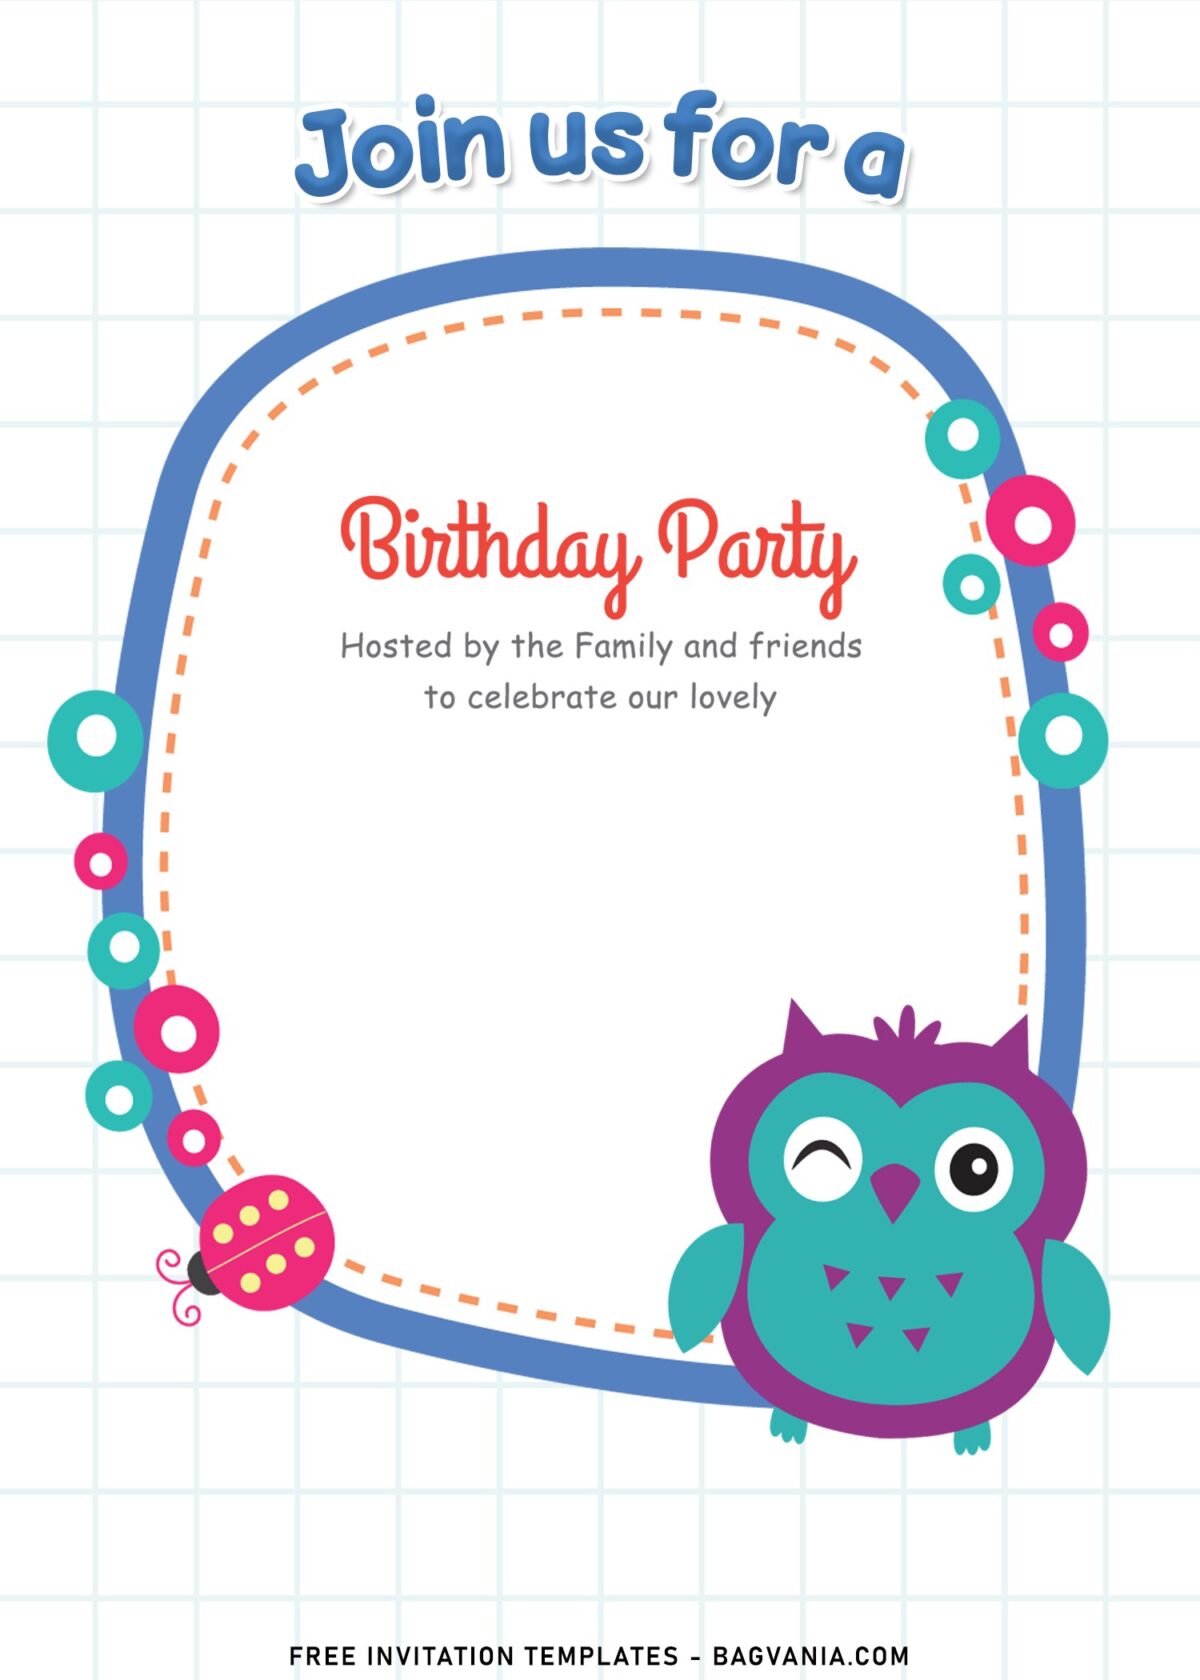 11+ Cute Owl Birthday Invitation Templates For Your Little Ones' Birthday with purple owl